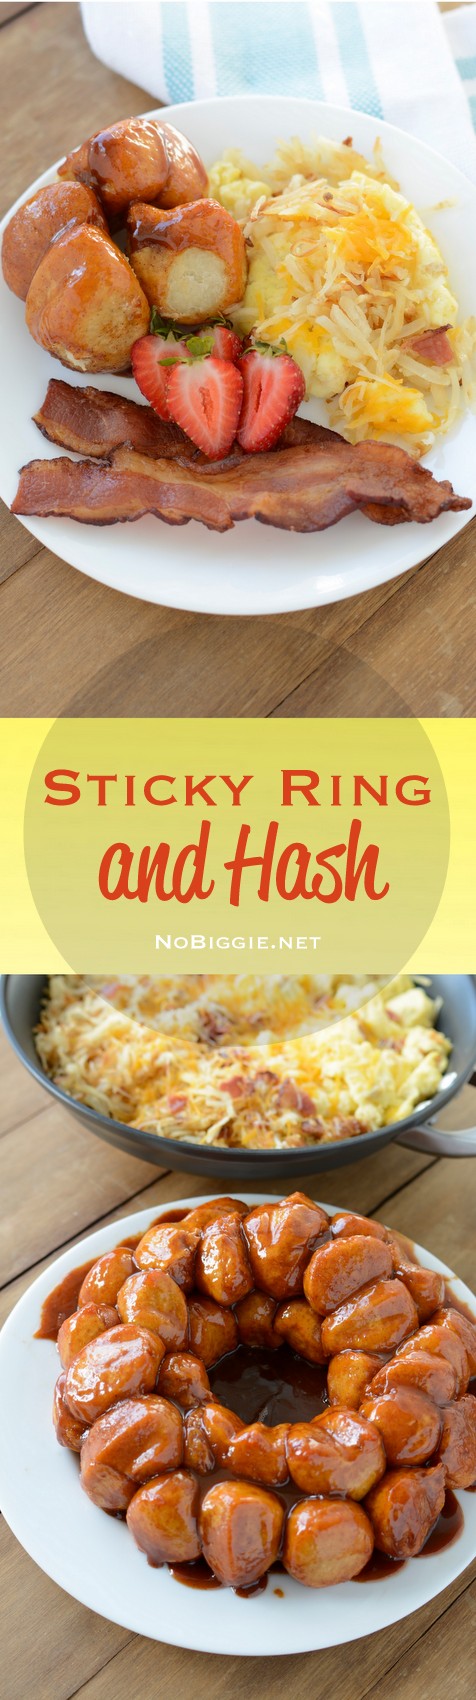 http://www.nobiggie.net/wp-content/uploads/2016/03/sticky-ring-and-hash-our-breakfast-tradition.jpg